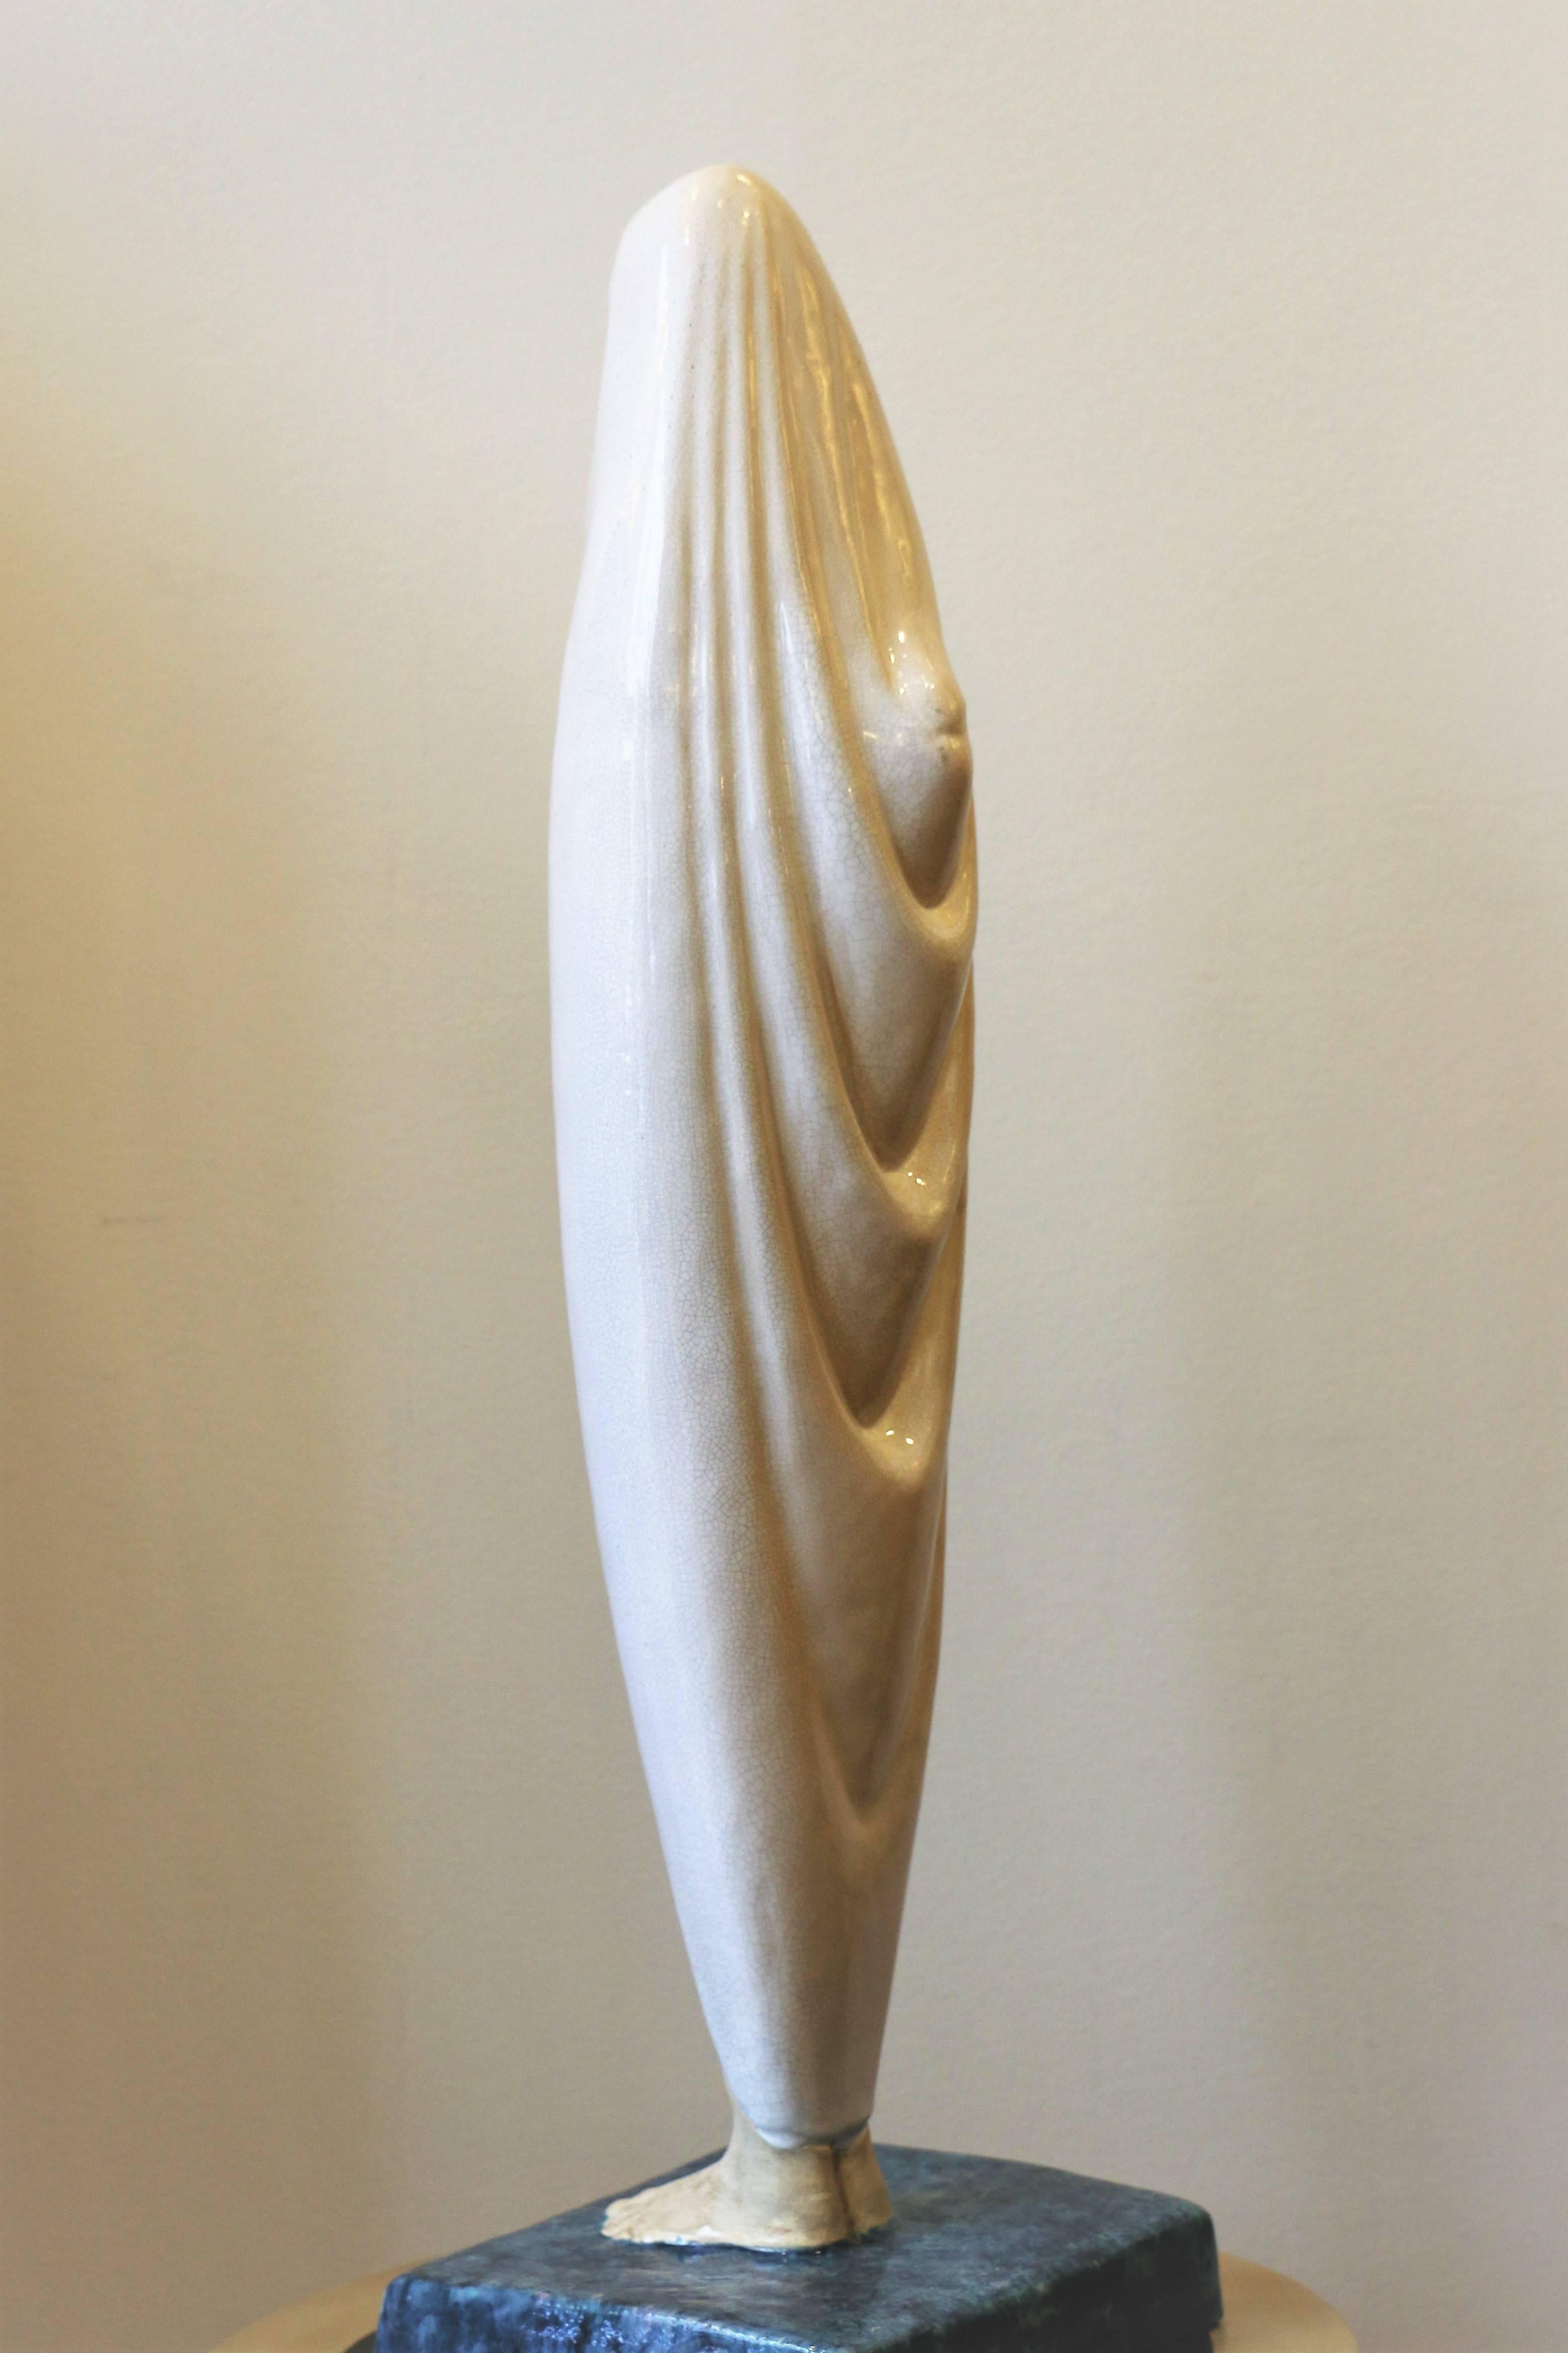 Exceptional 74cm high ceramic by Céline Lepage (1882-1928) titled 